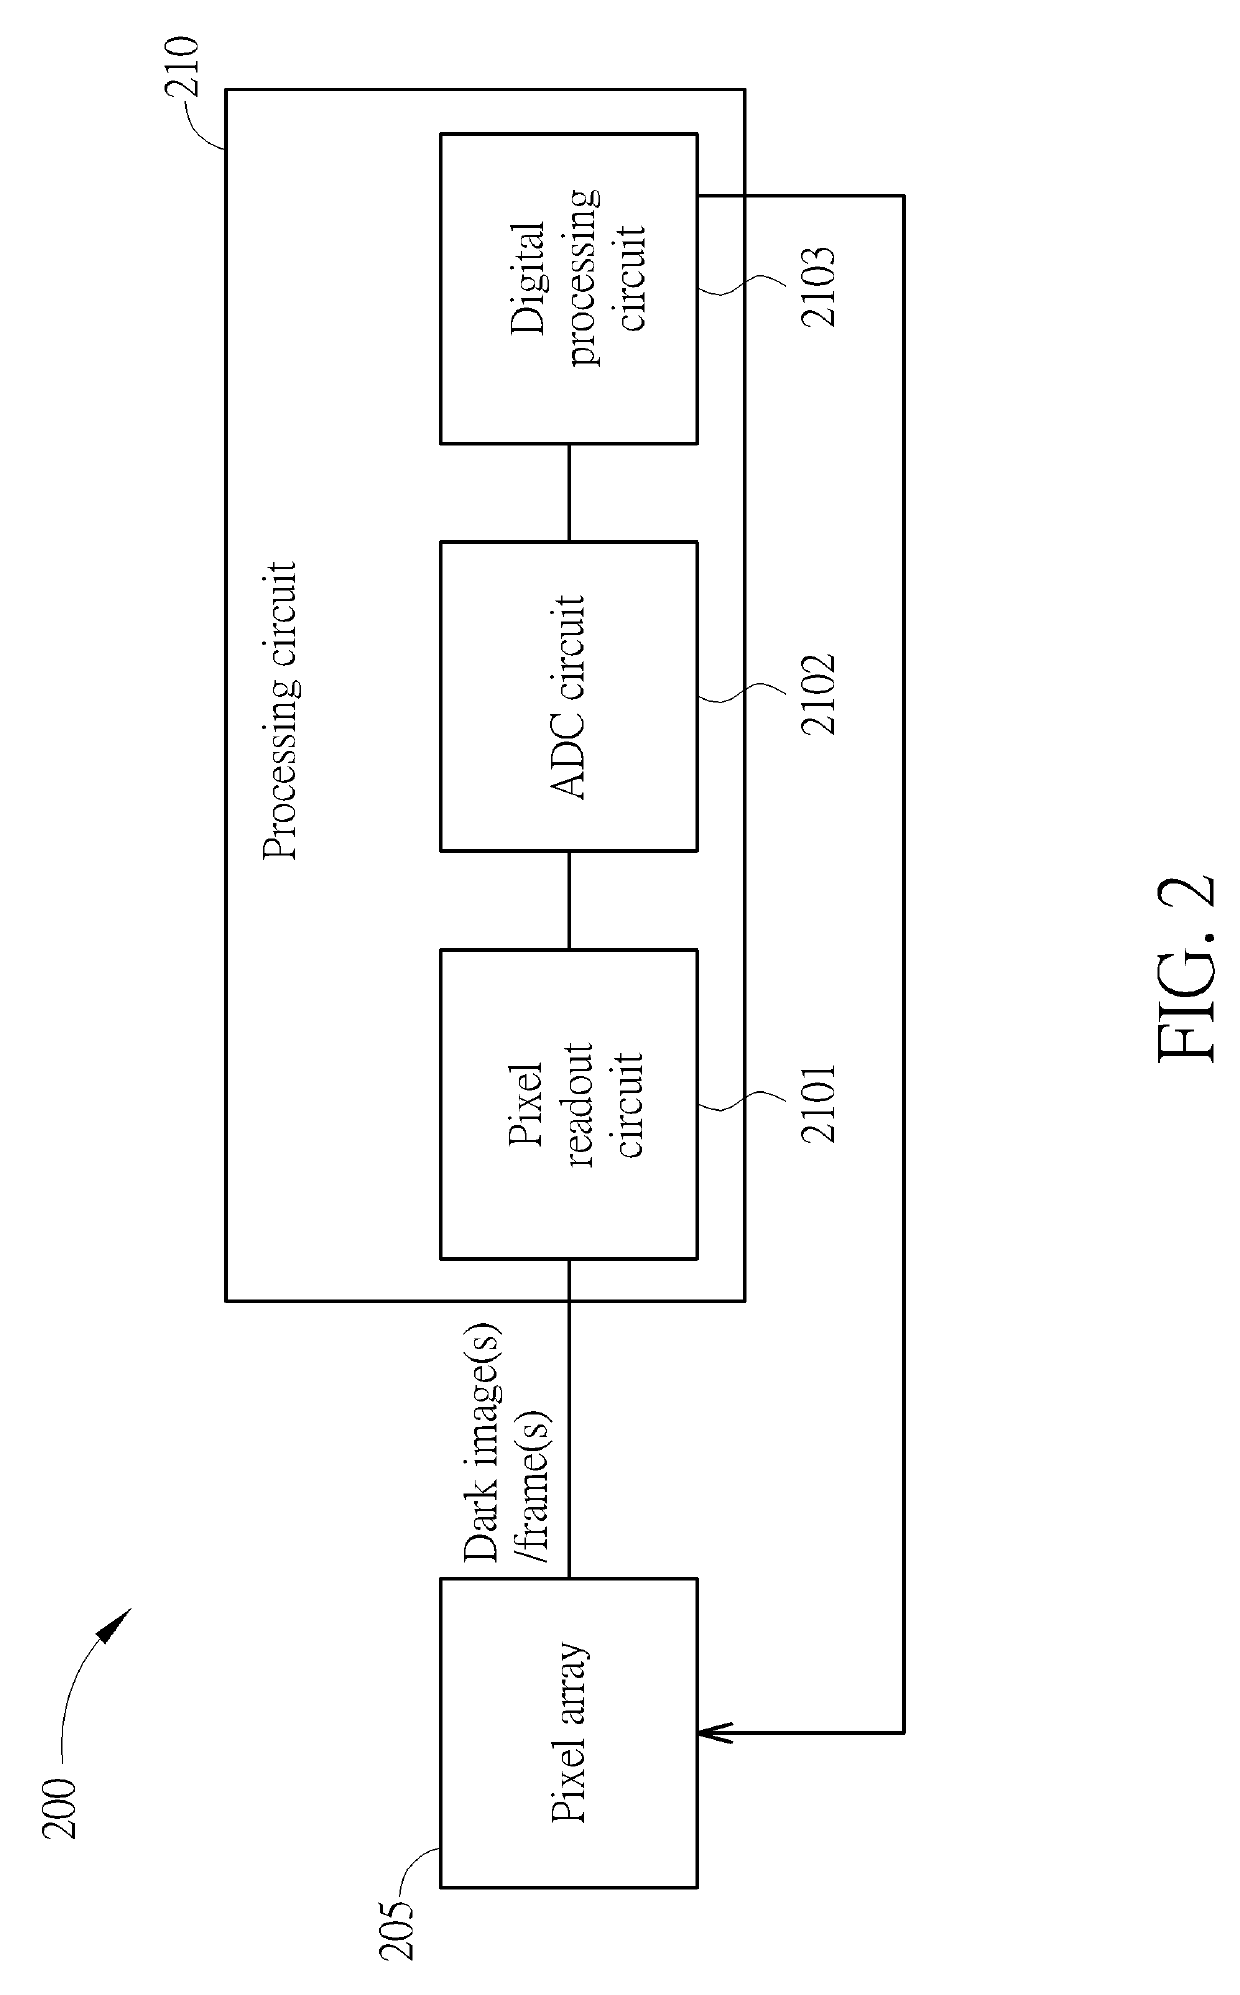 Image sensor device and method capable of detecting actual temperature range in which the image sensor device is being operated without using accurate temperature sensor